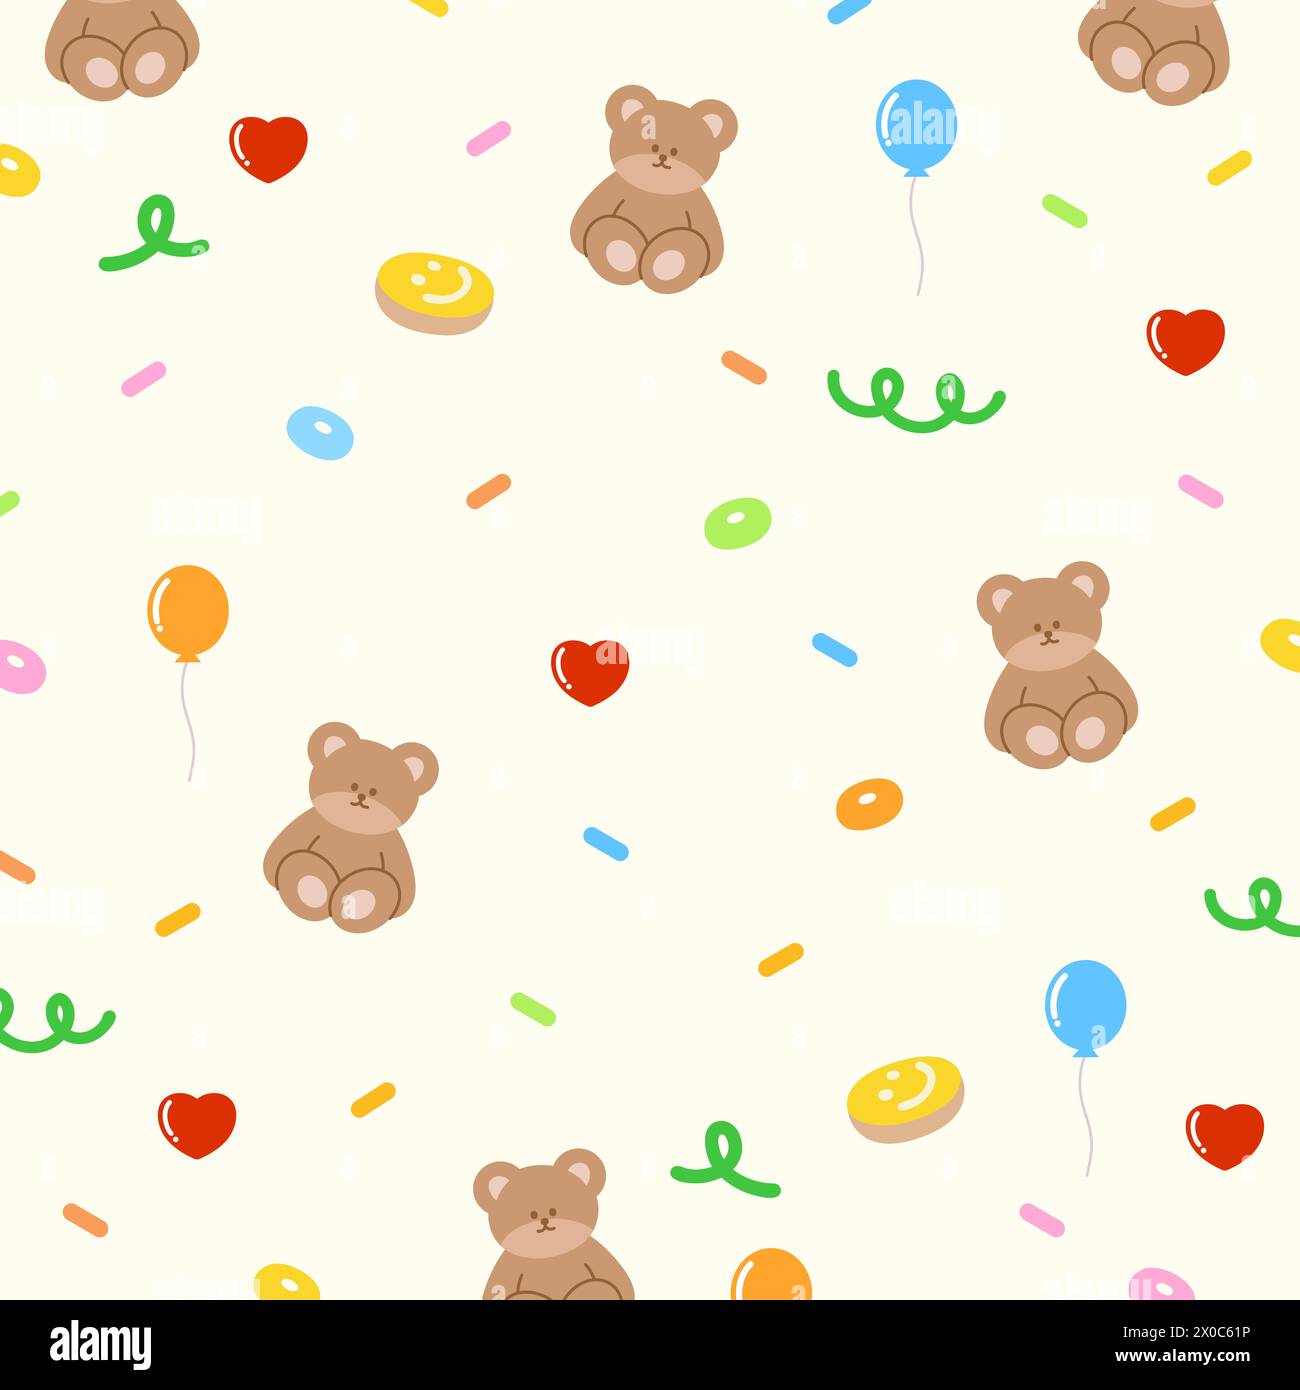 Illustration of teddy bear, donut, heart, balloon, doodles for animal, wallpaper, background, gift wrap, backdrop, kid clothes, pattern, packaging Stock Vector